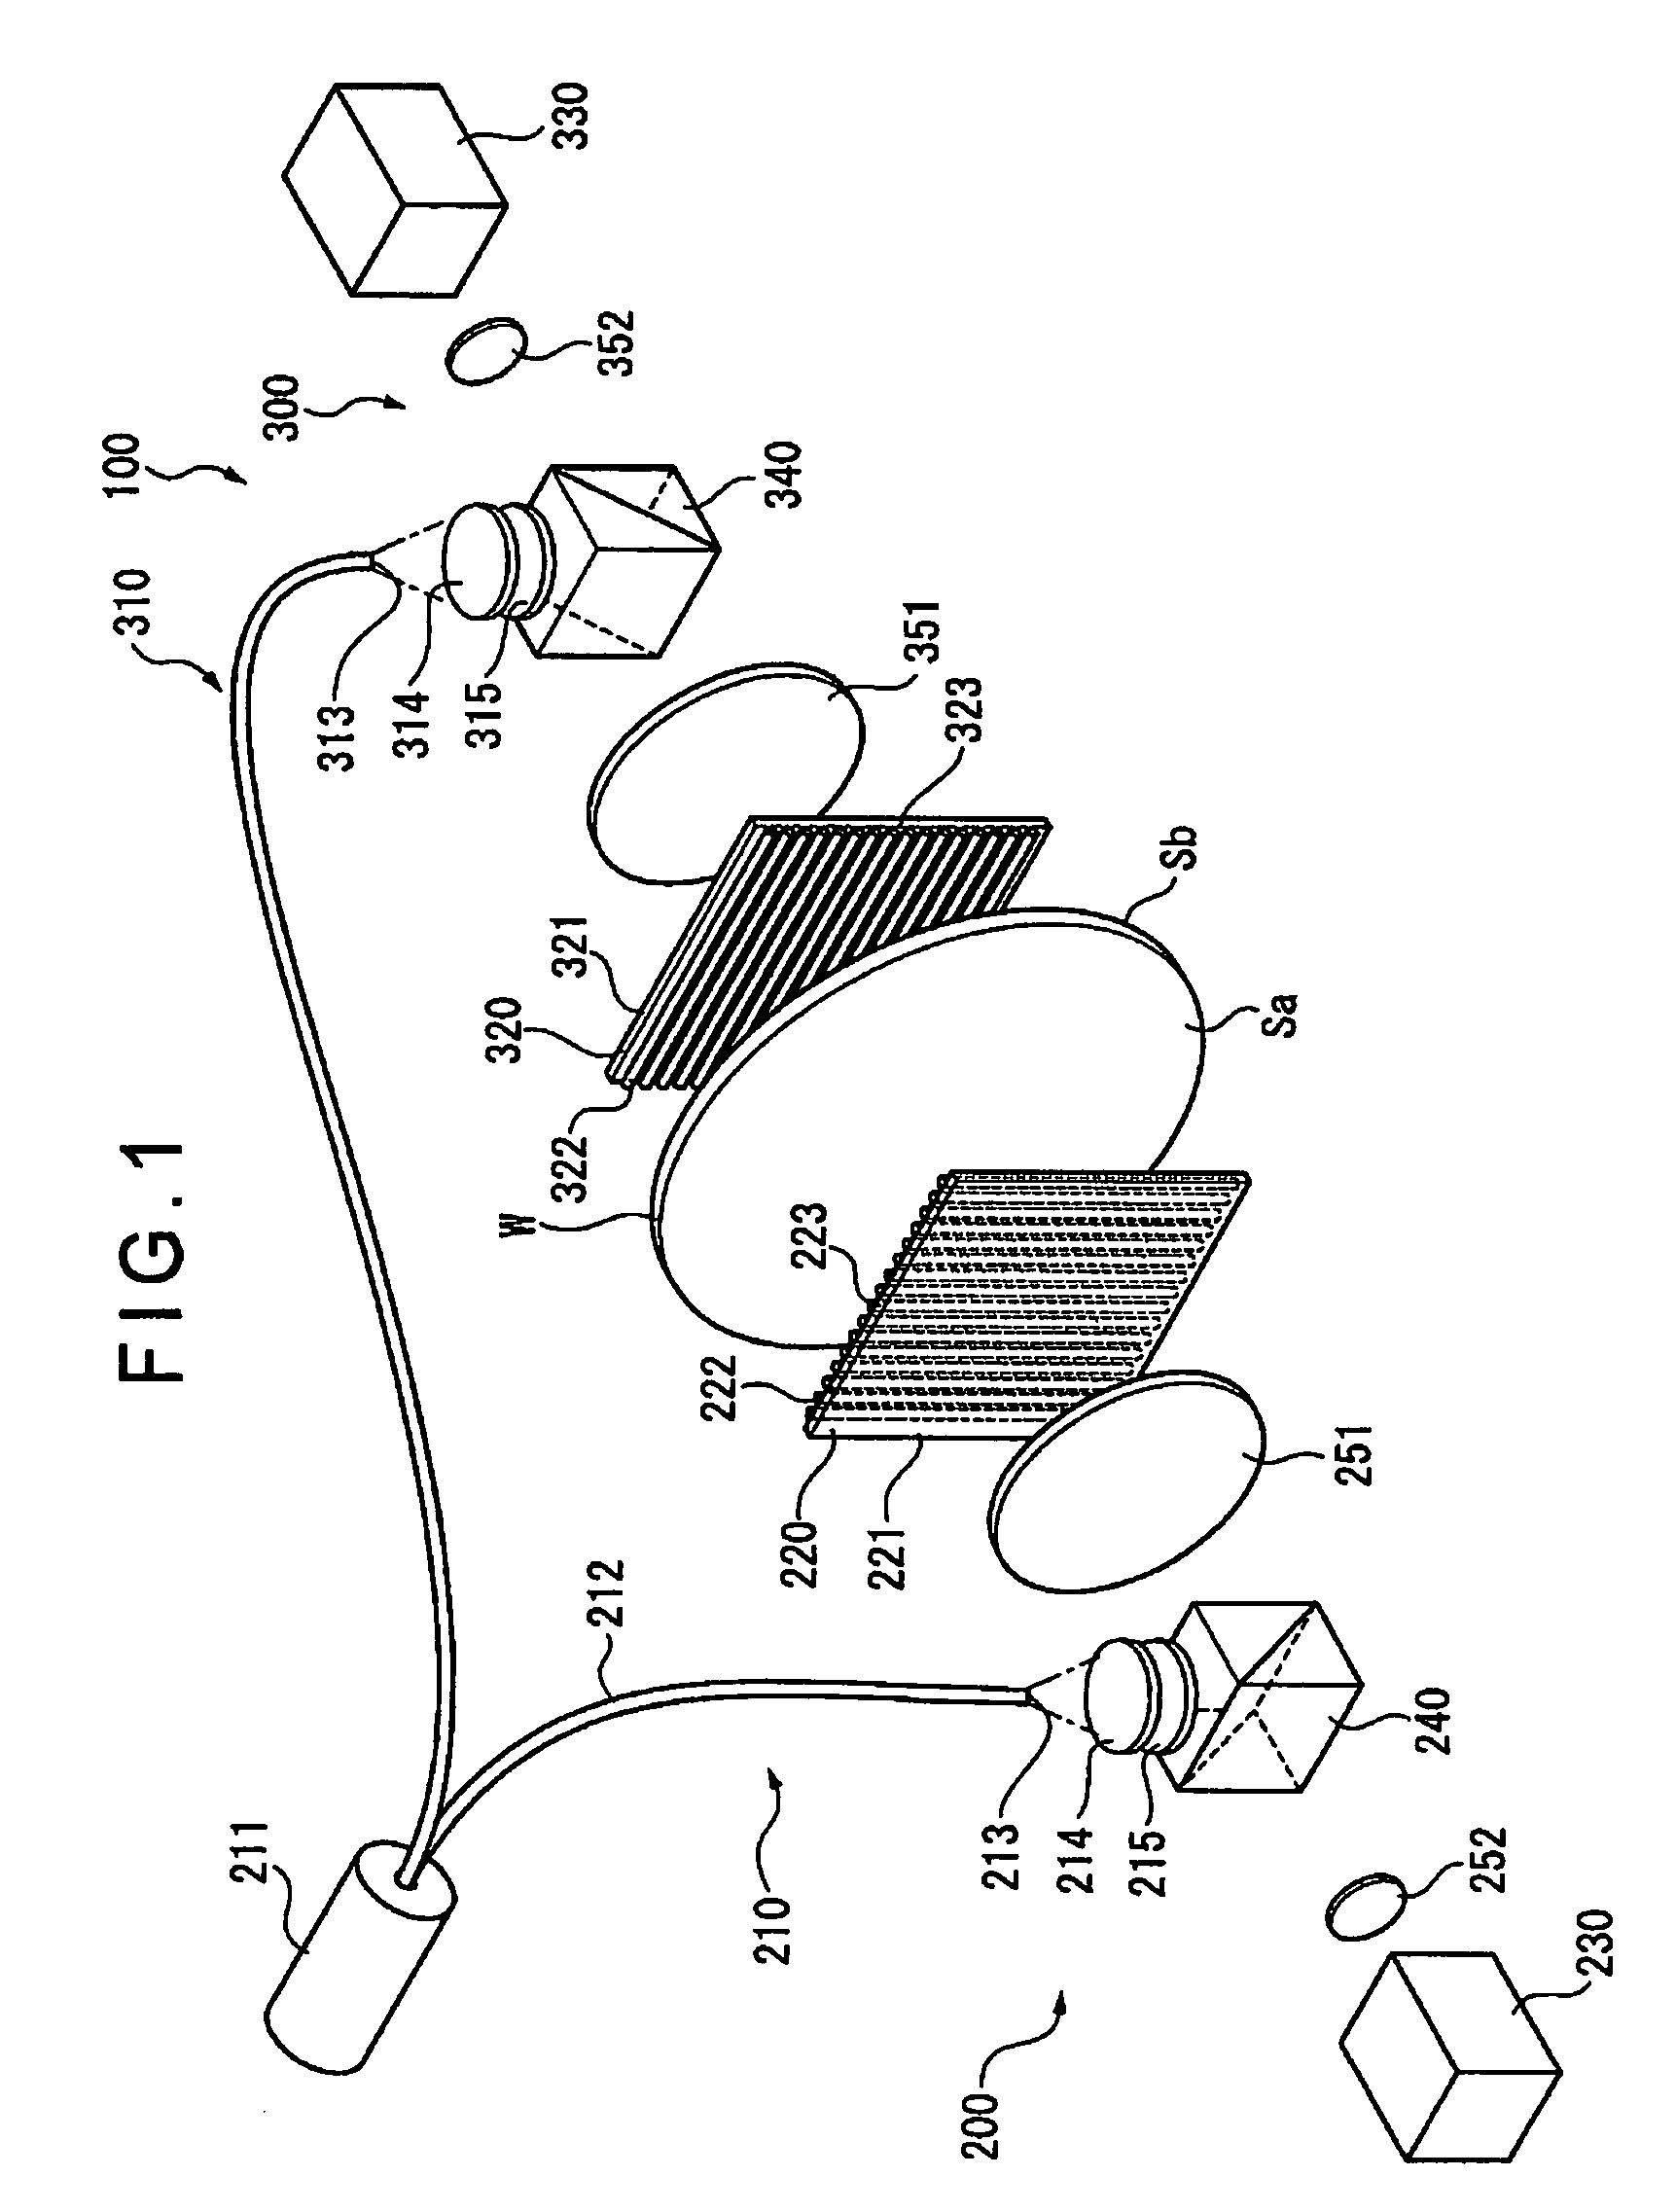 Dual polarization interferometers for measuring opposite sides of a workpiece